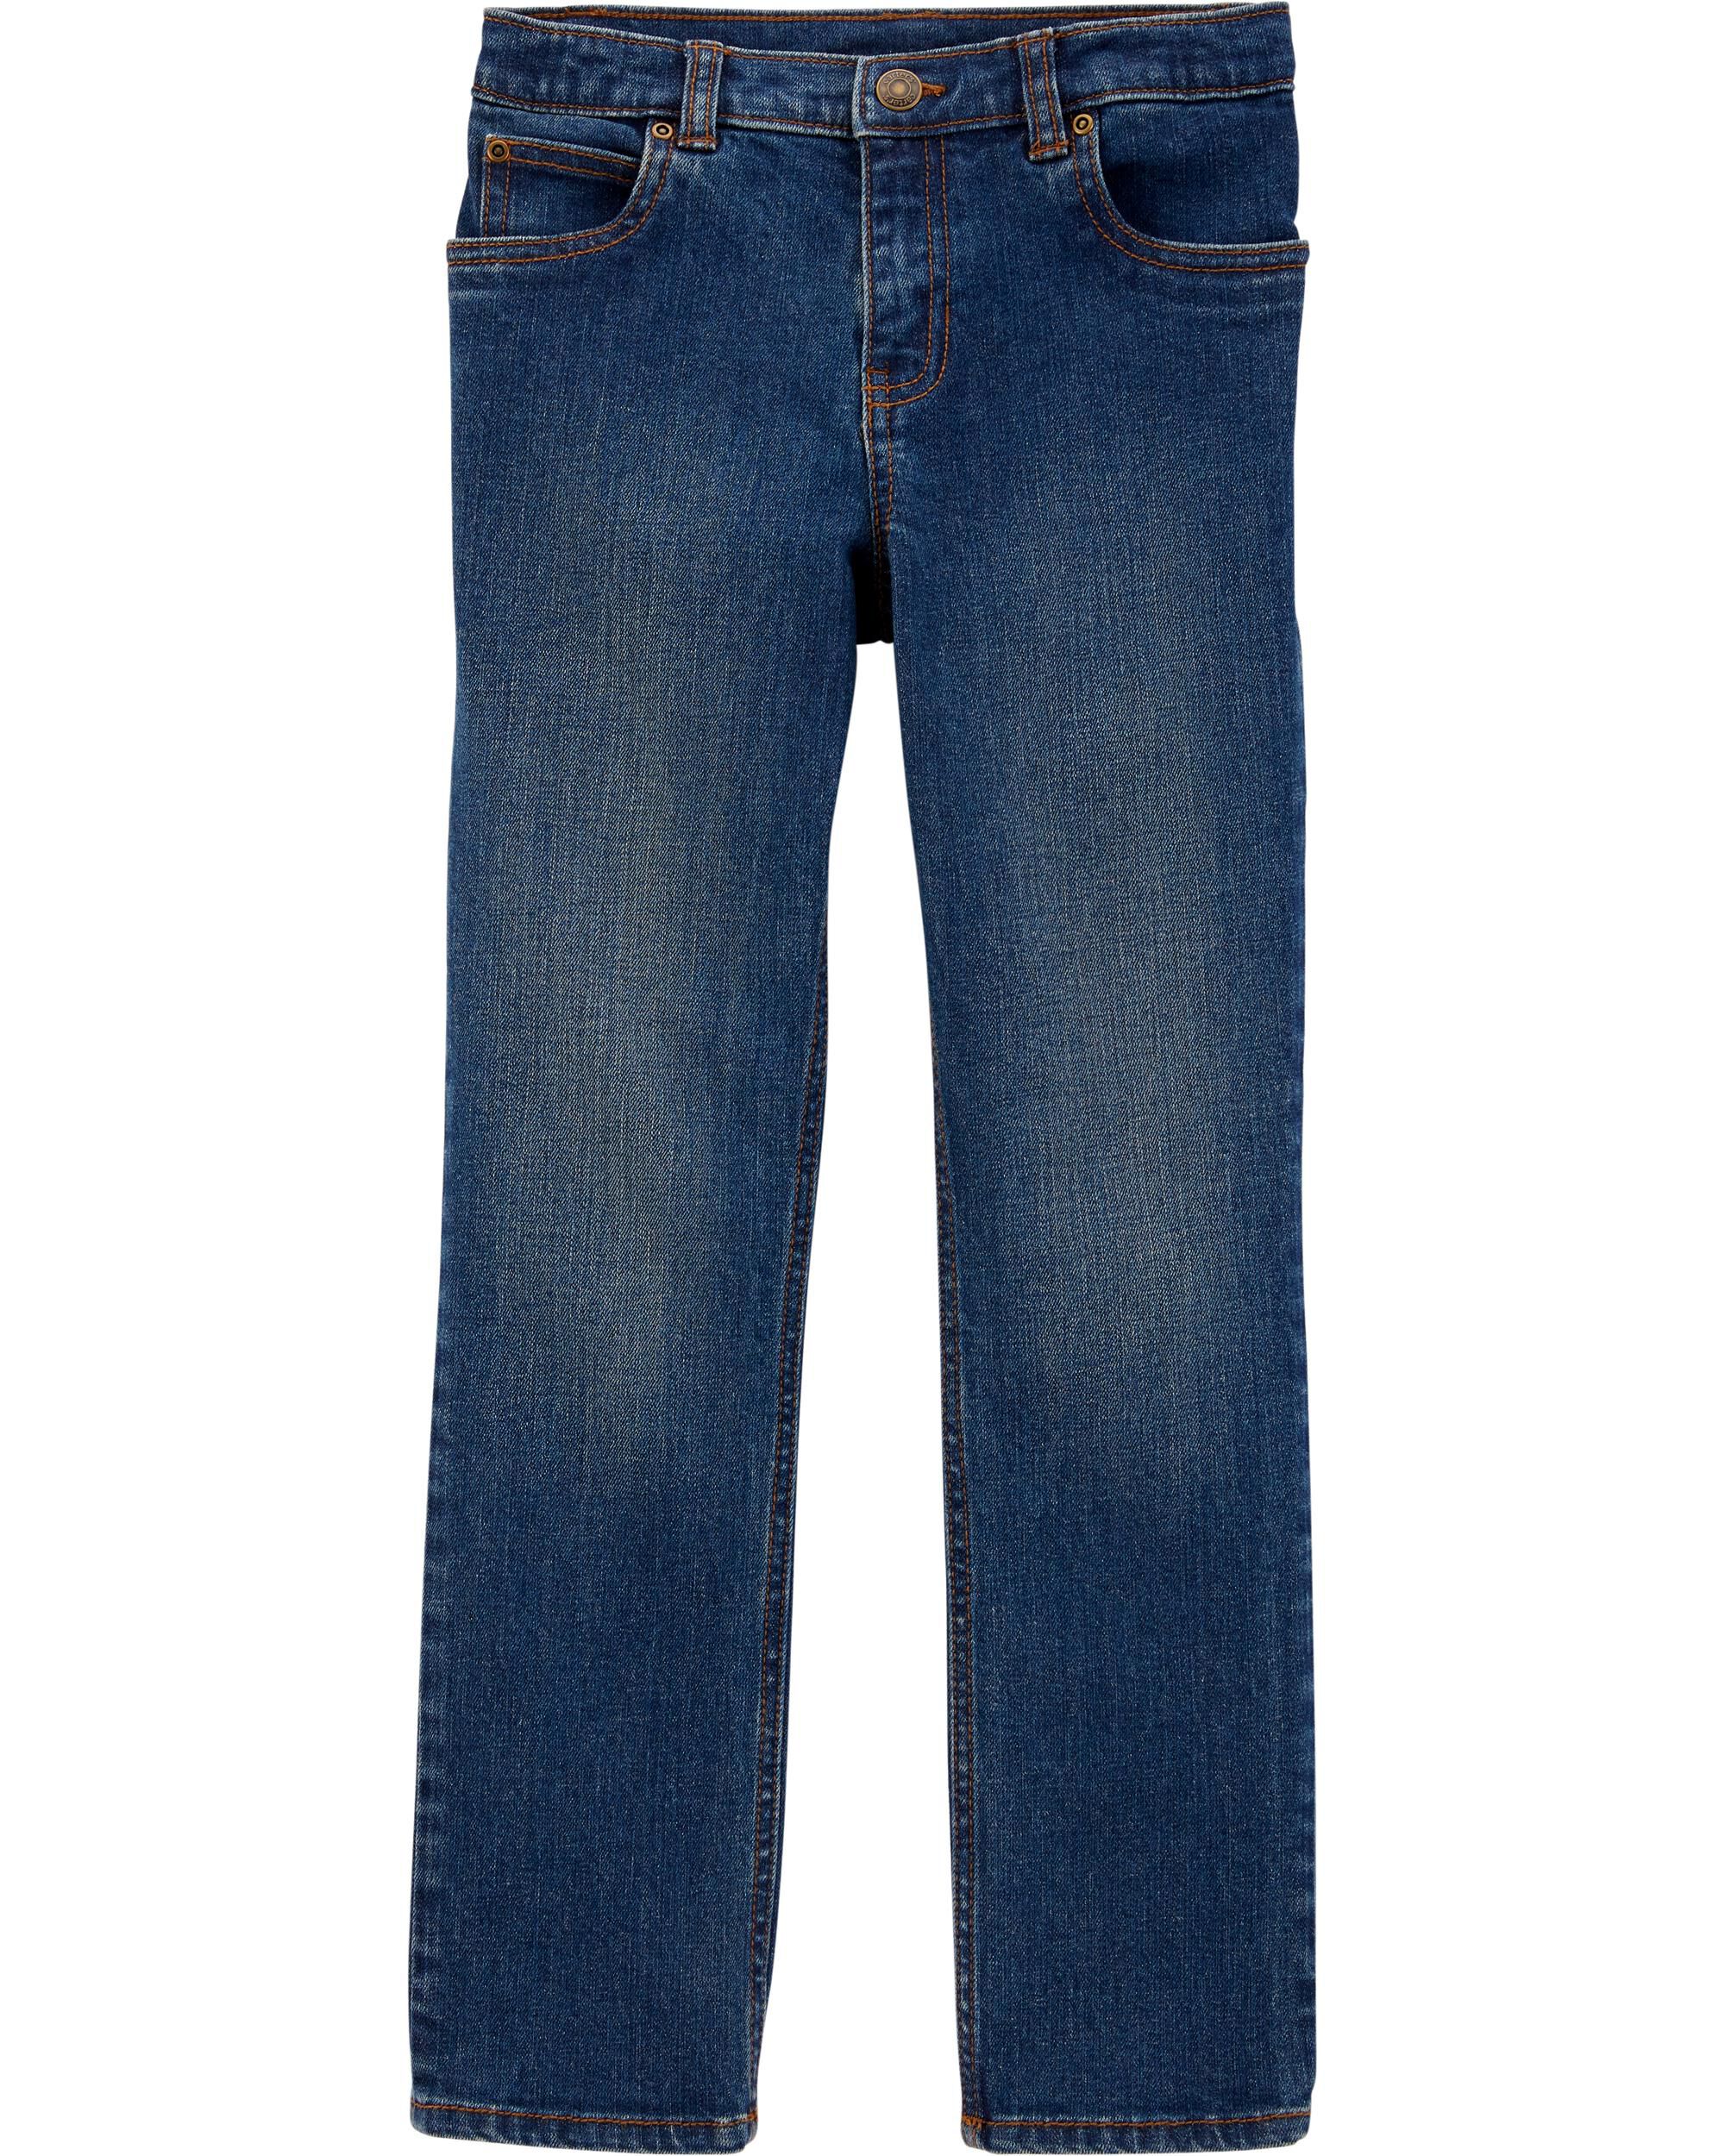 pull on jeans boy size 7